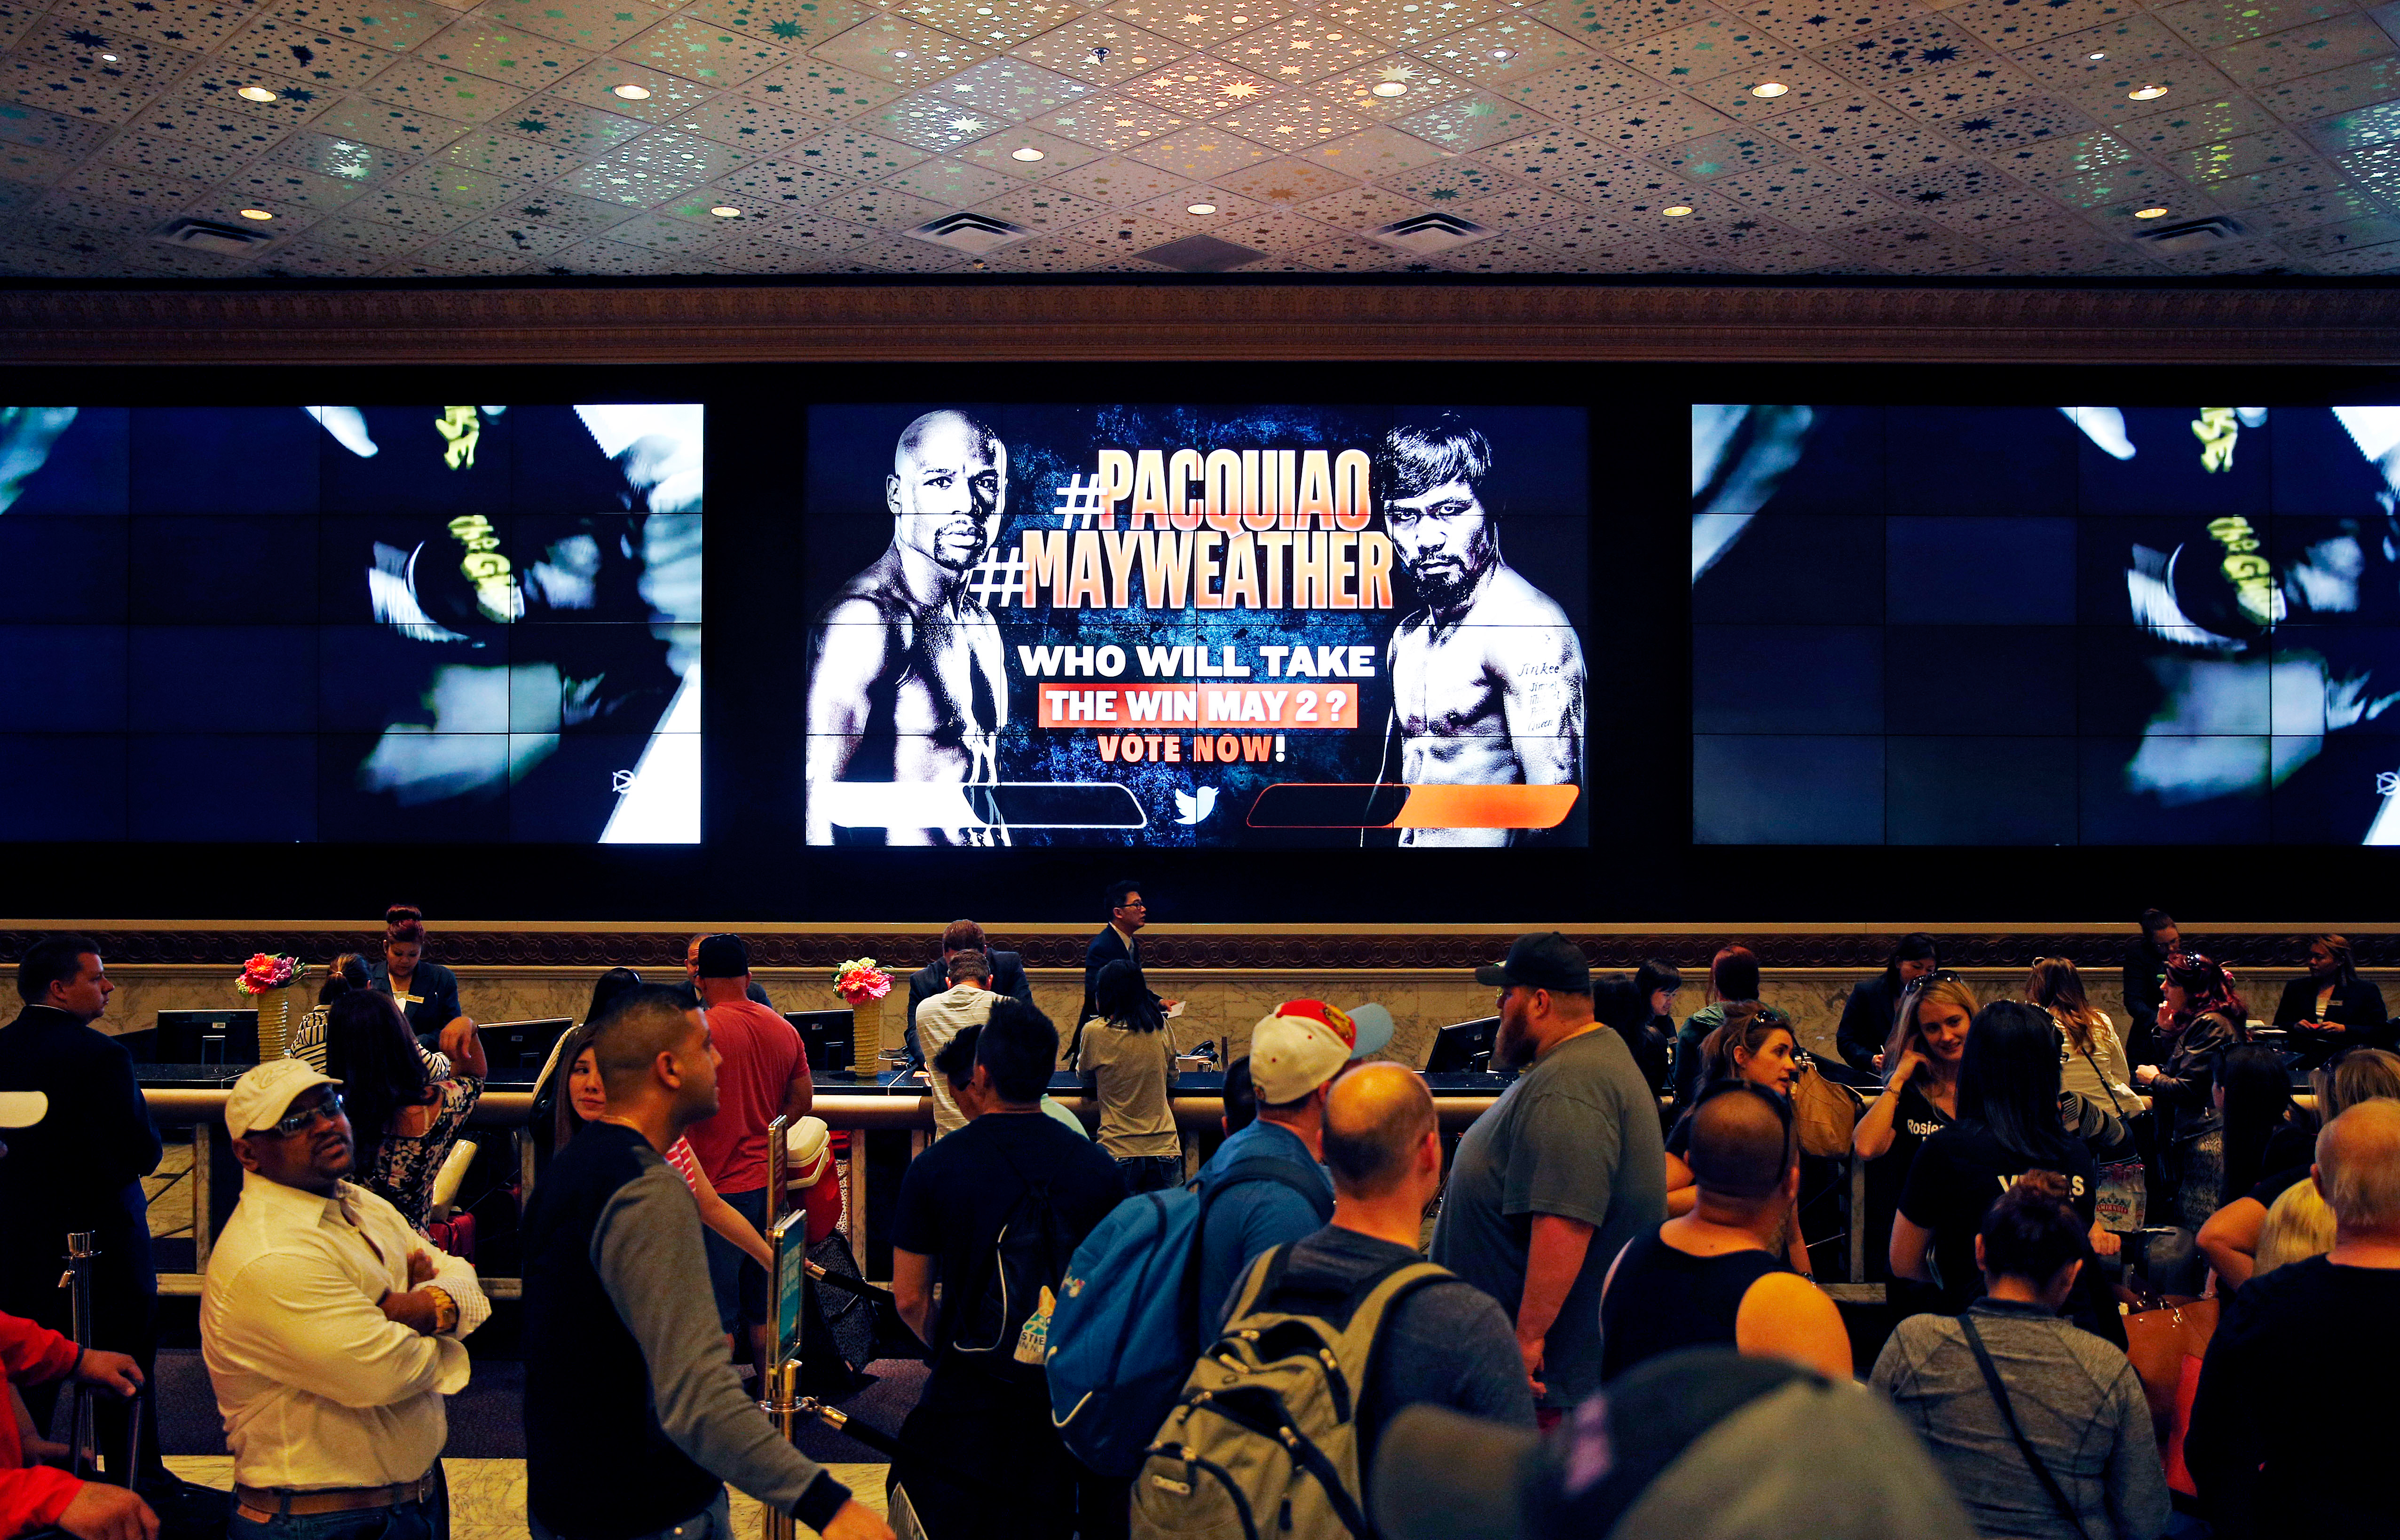 An advertisement for a fight between Floyd Mayweather Jr. and Manny Pacquiao is seen on a screen as people wait to check in at the MGM Grand Friday, April 24, 2015, in Las Vegas. The fight is scheduled to take place May 2 at the hotel and casino.